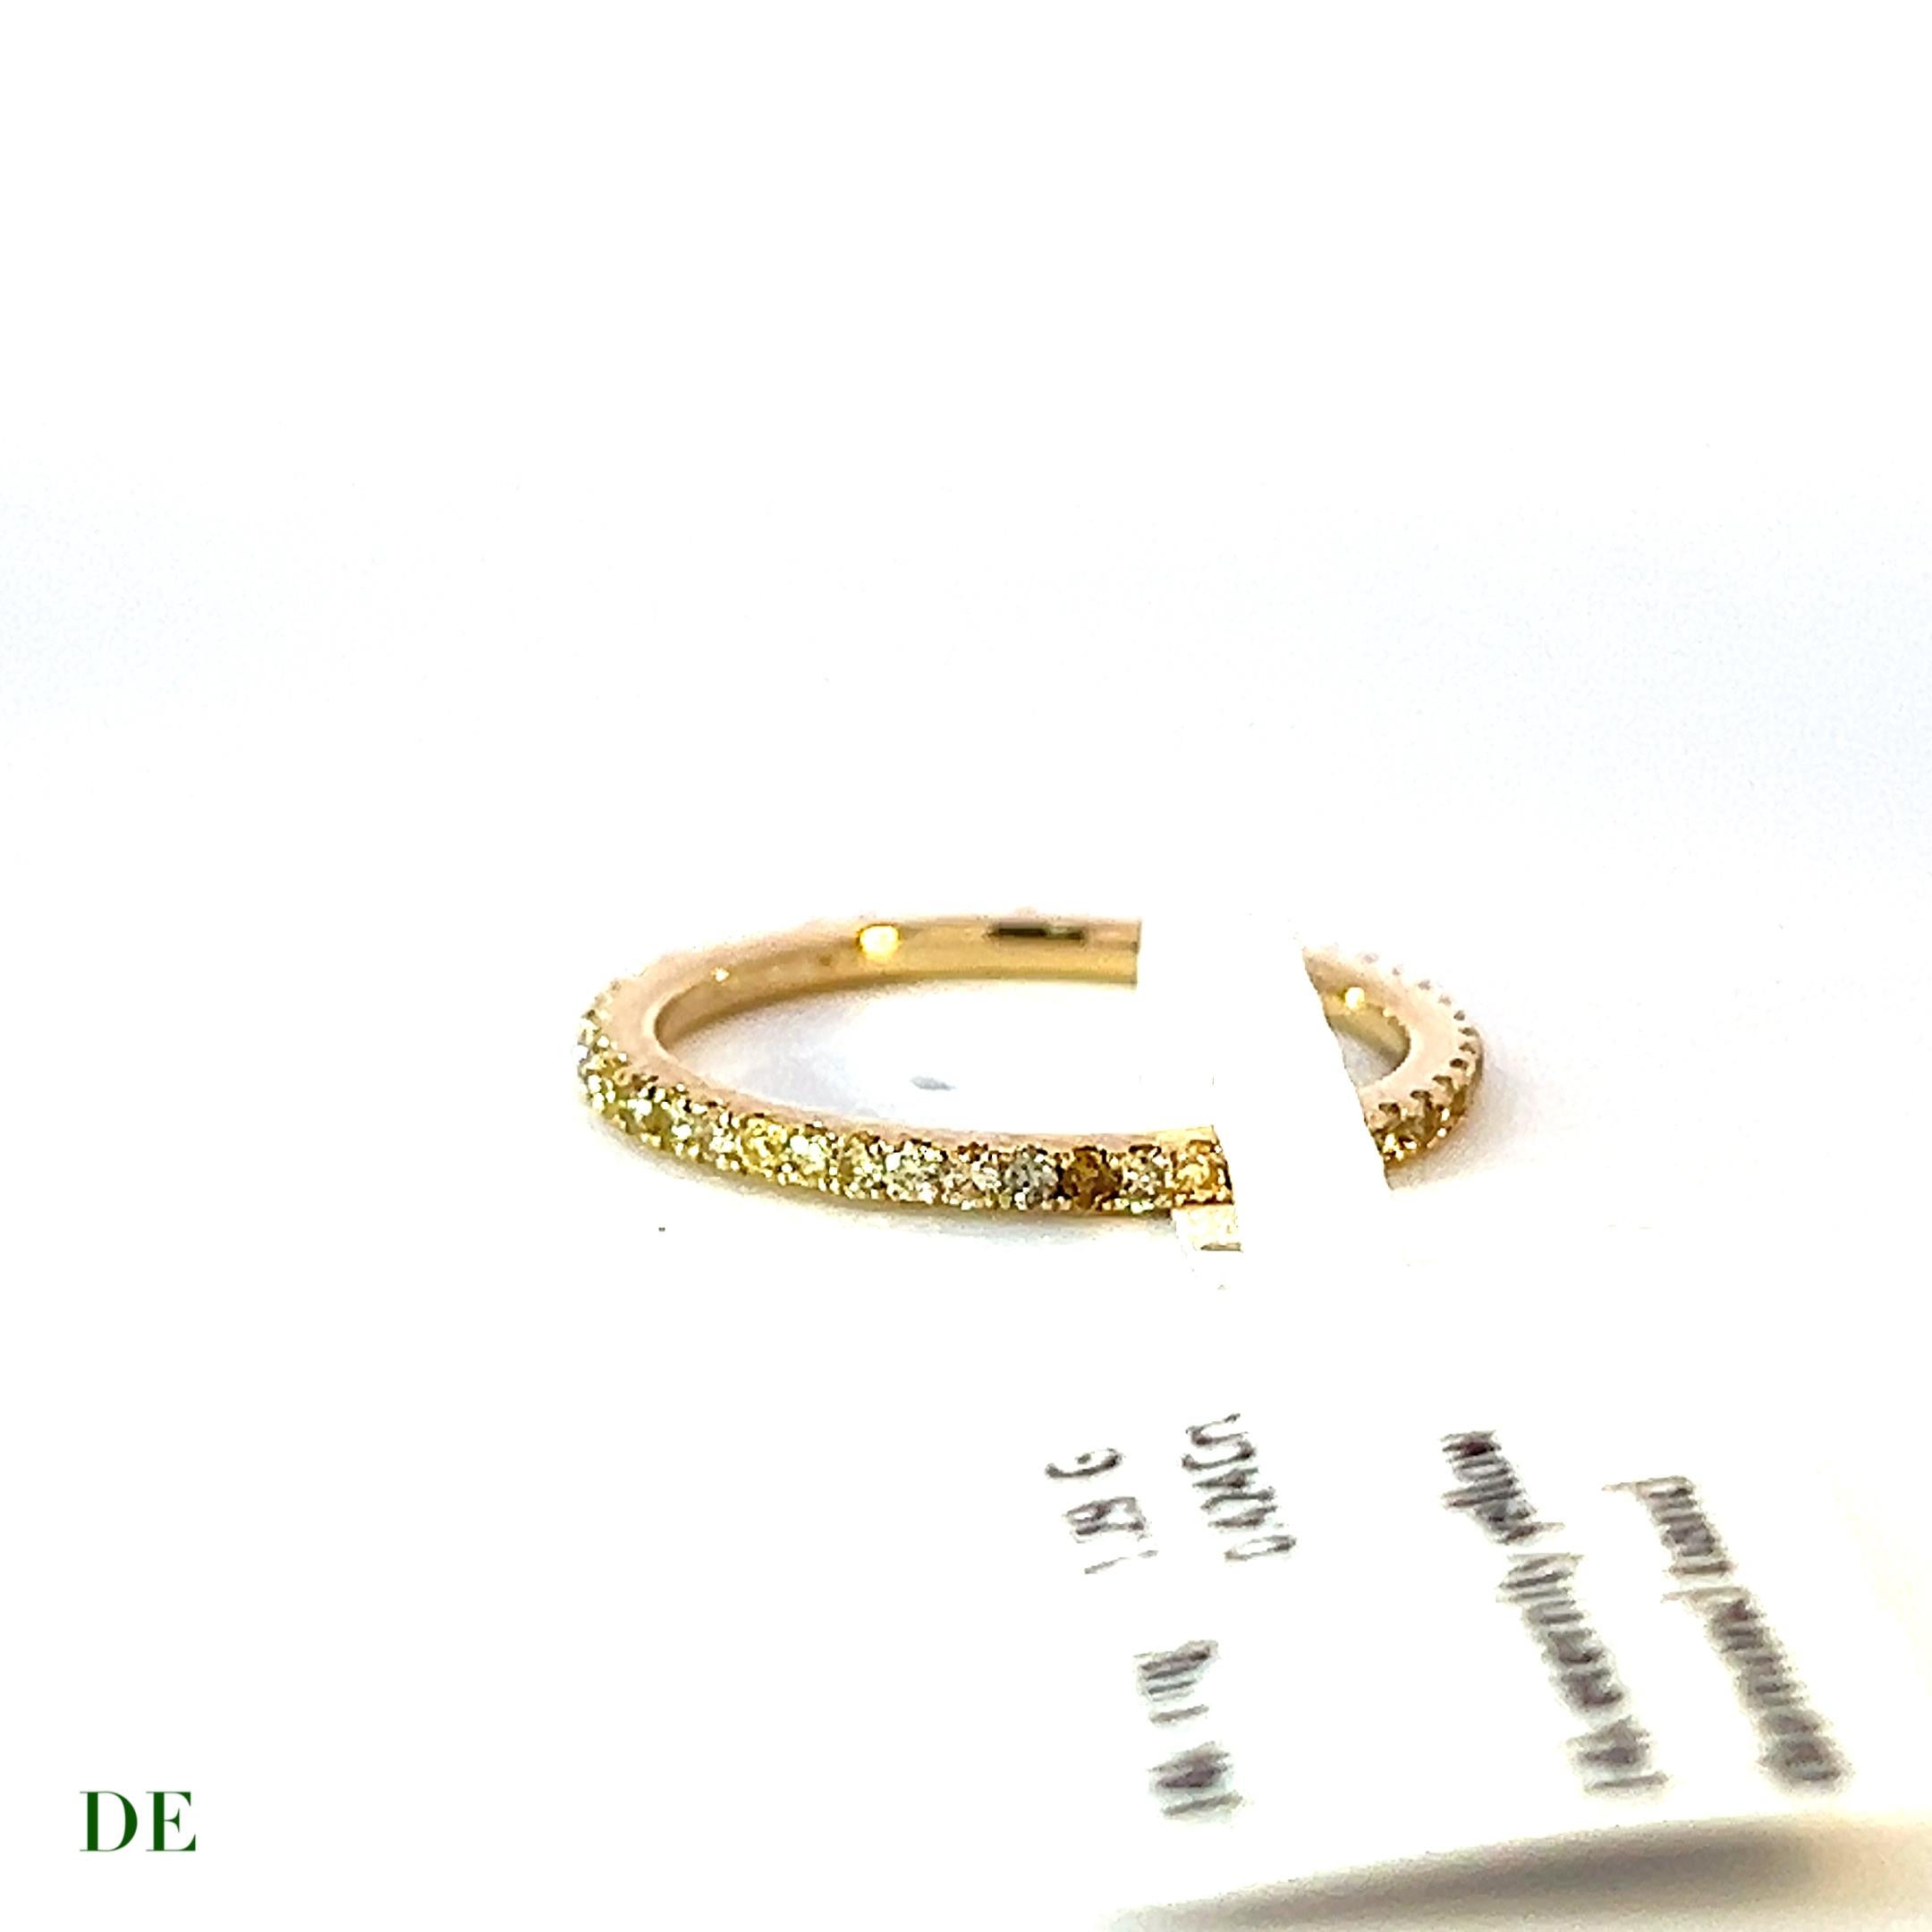 Brilliant Cut Classic 14k Yellow Gold .42 Carat Round Golden Diamond Eternity Band Ring For Sale